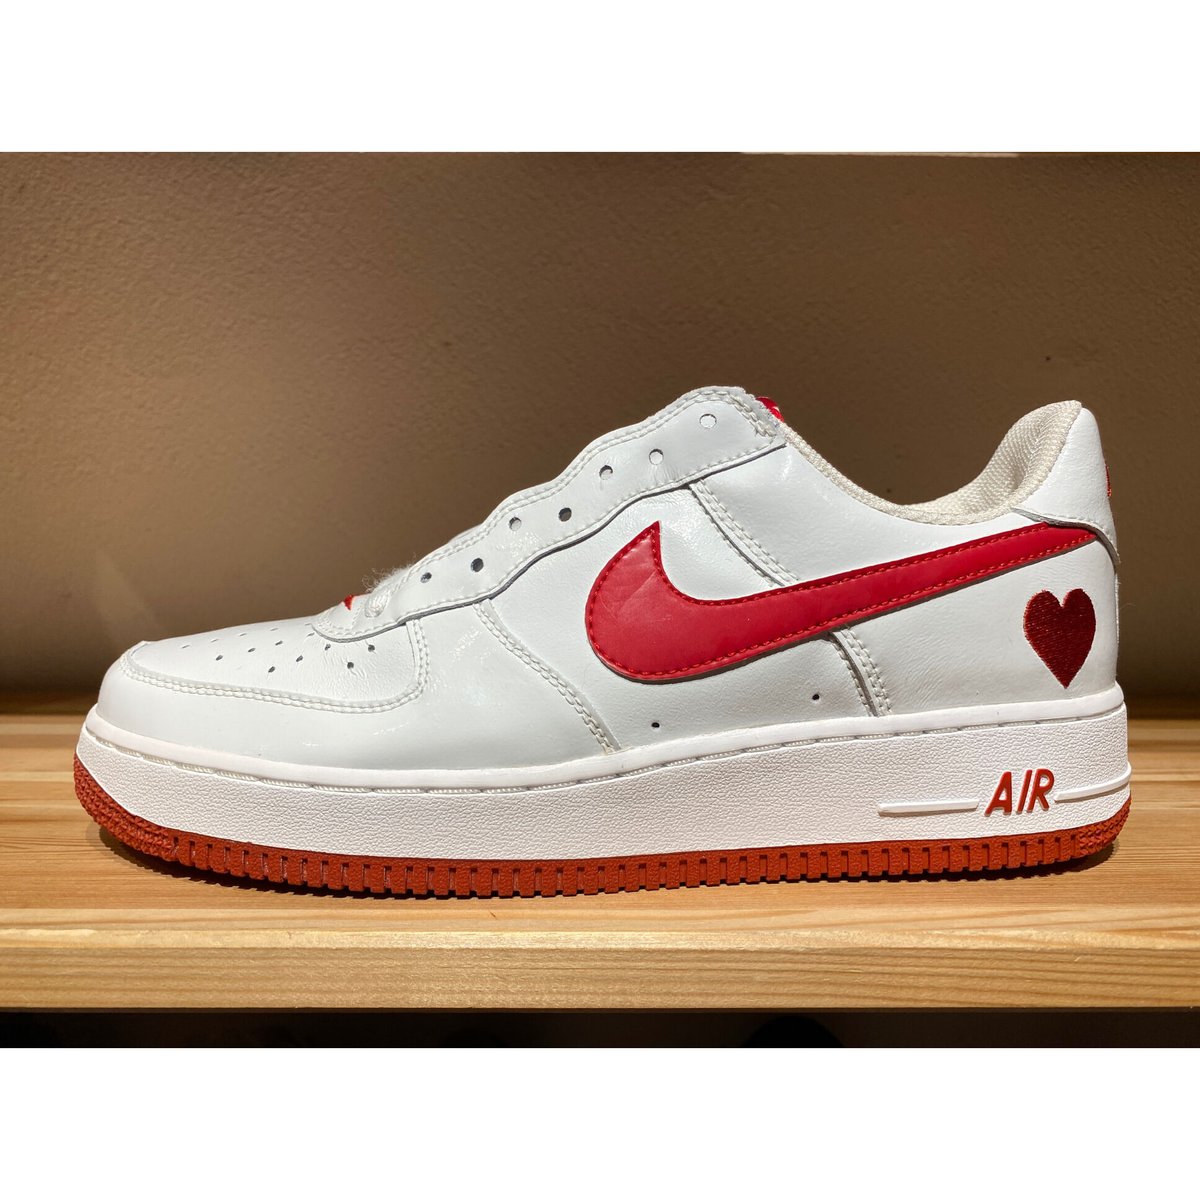 NIKE AIR FORCE 1 VALENTINE'S DAY